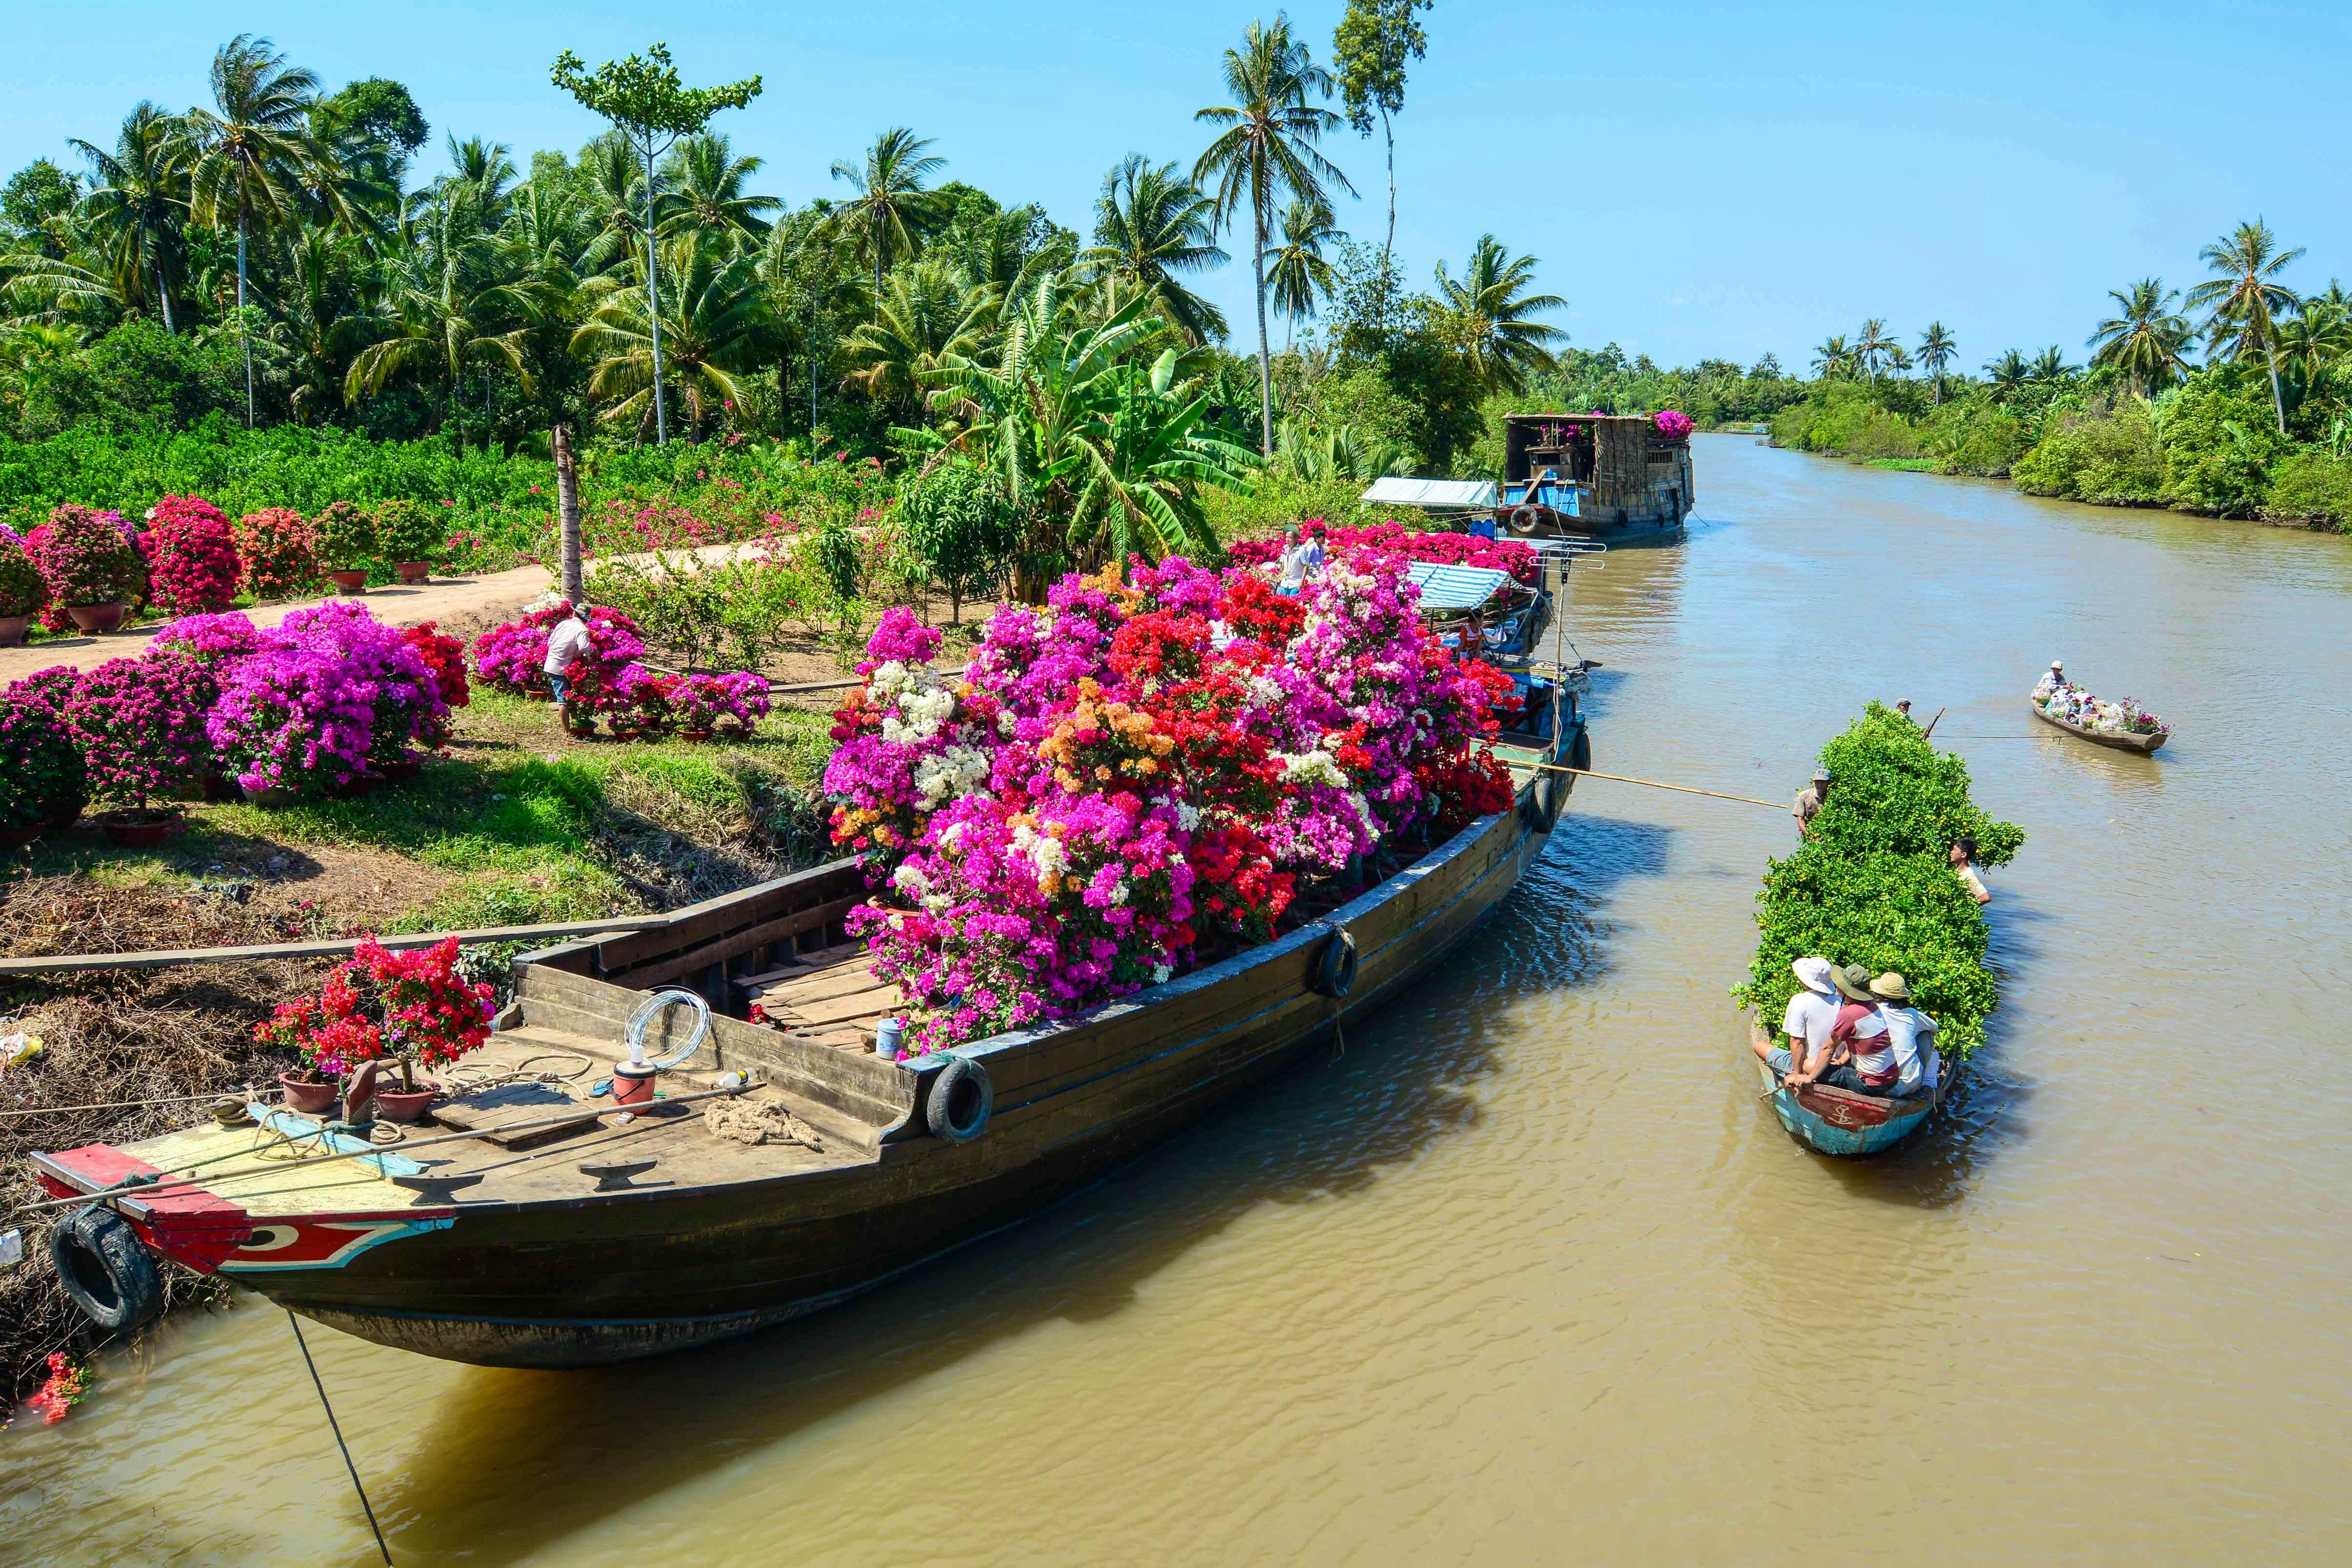 Mekong Delta , My Tho and also visit VInh Trang pagoda Full Day Excursion with Lunch